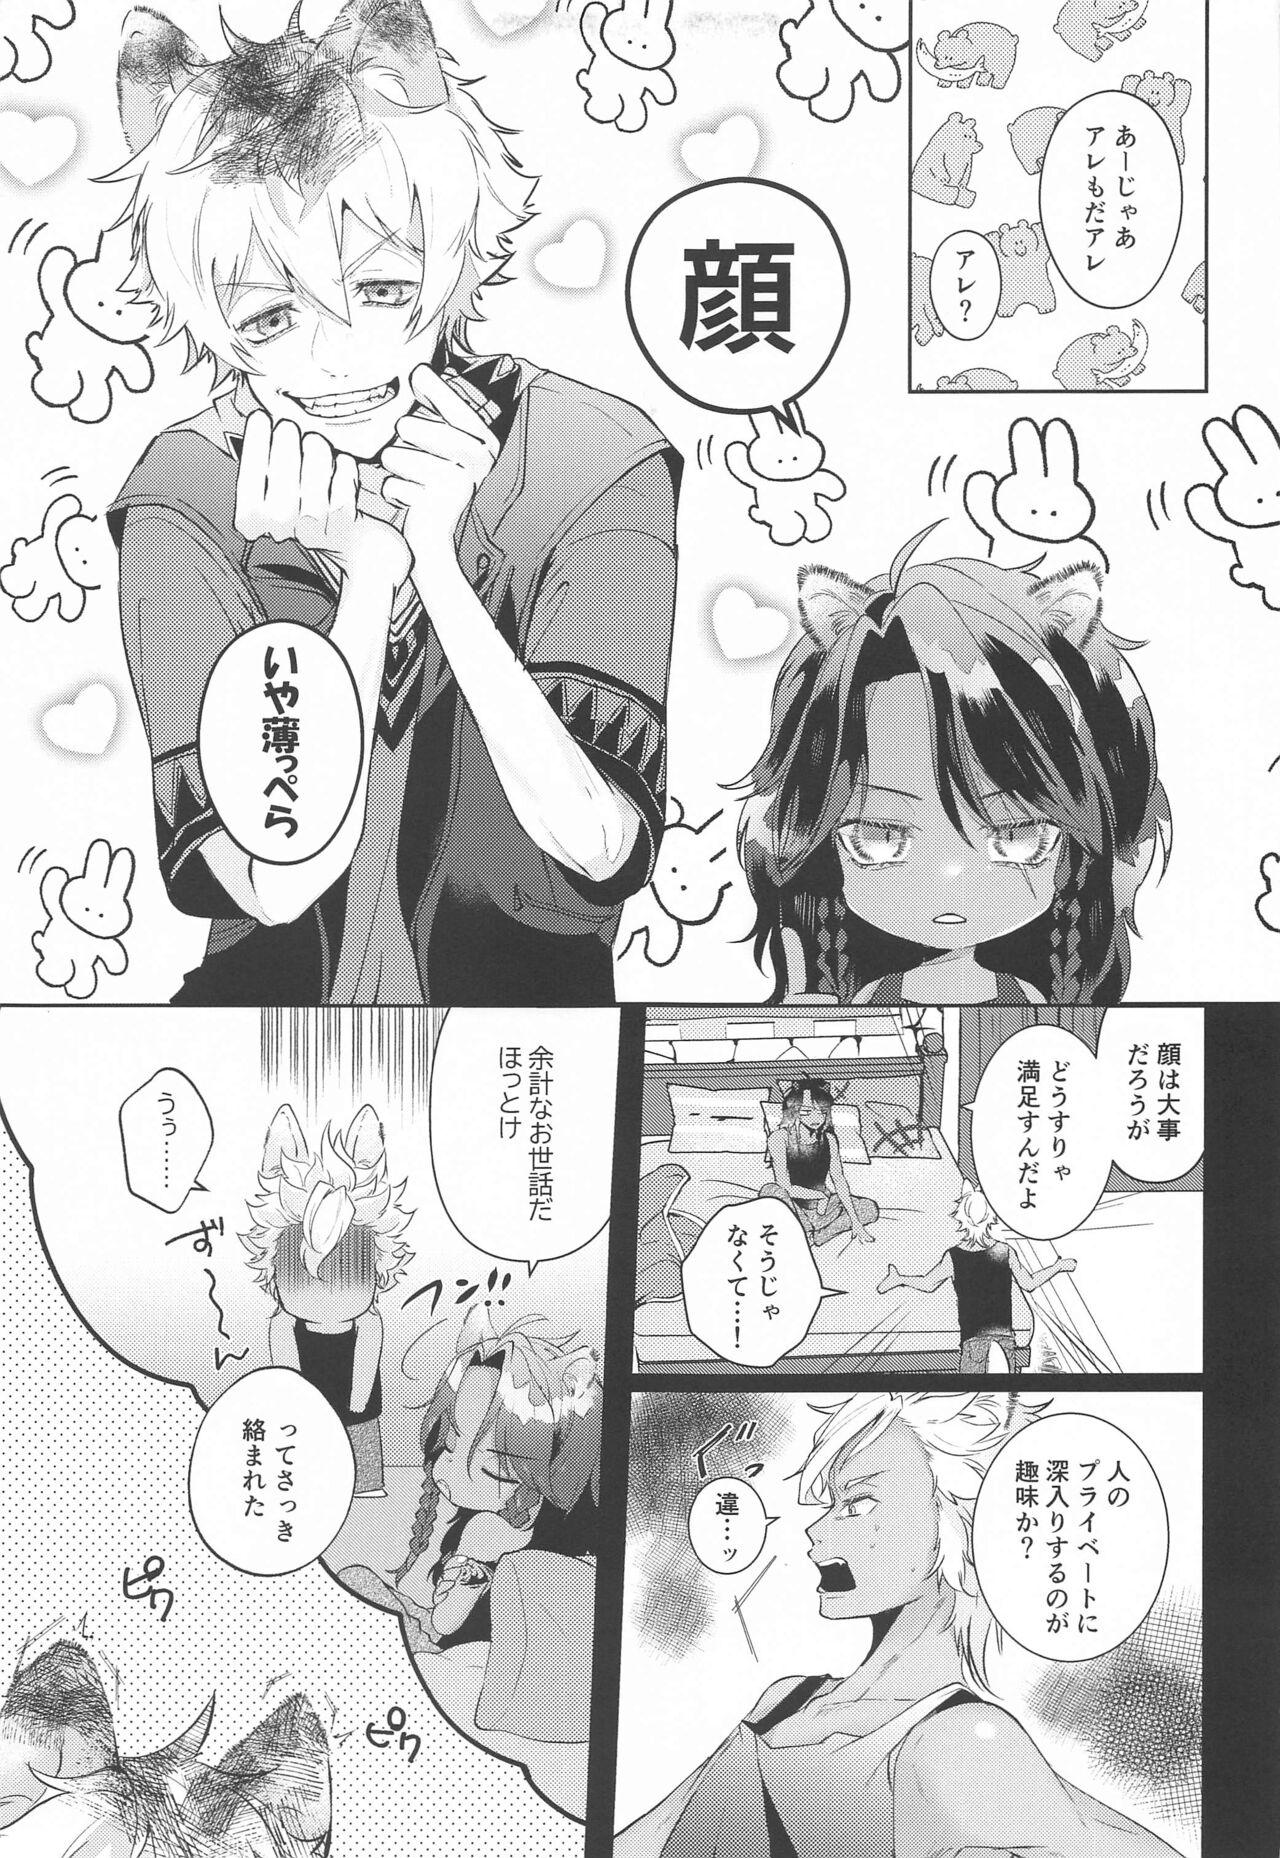 Gorgeous Kanchigai Over Run!! - over run from a misunderstanding - Disney twisted-wonderland Fisting - Page 4